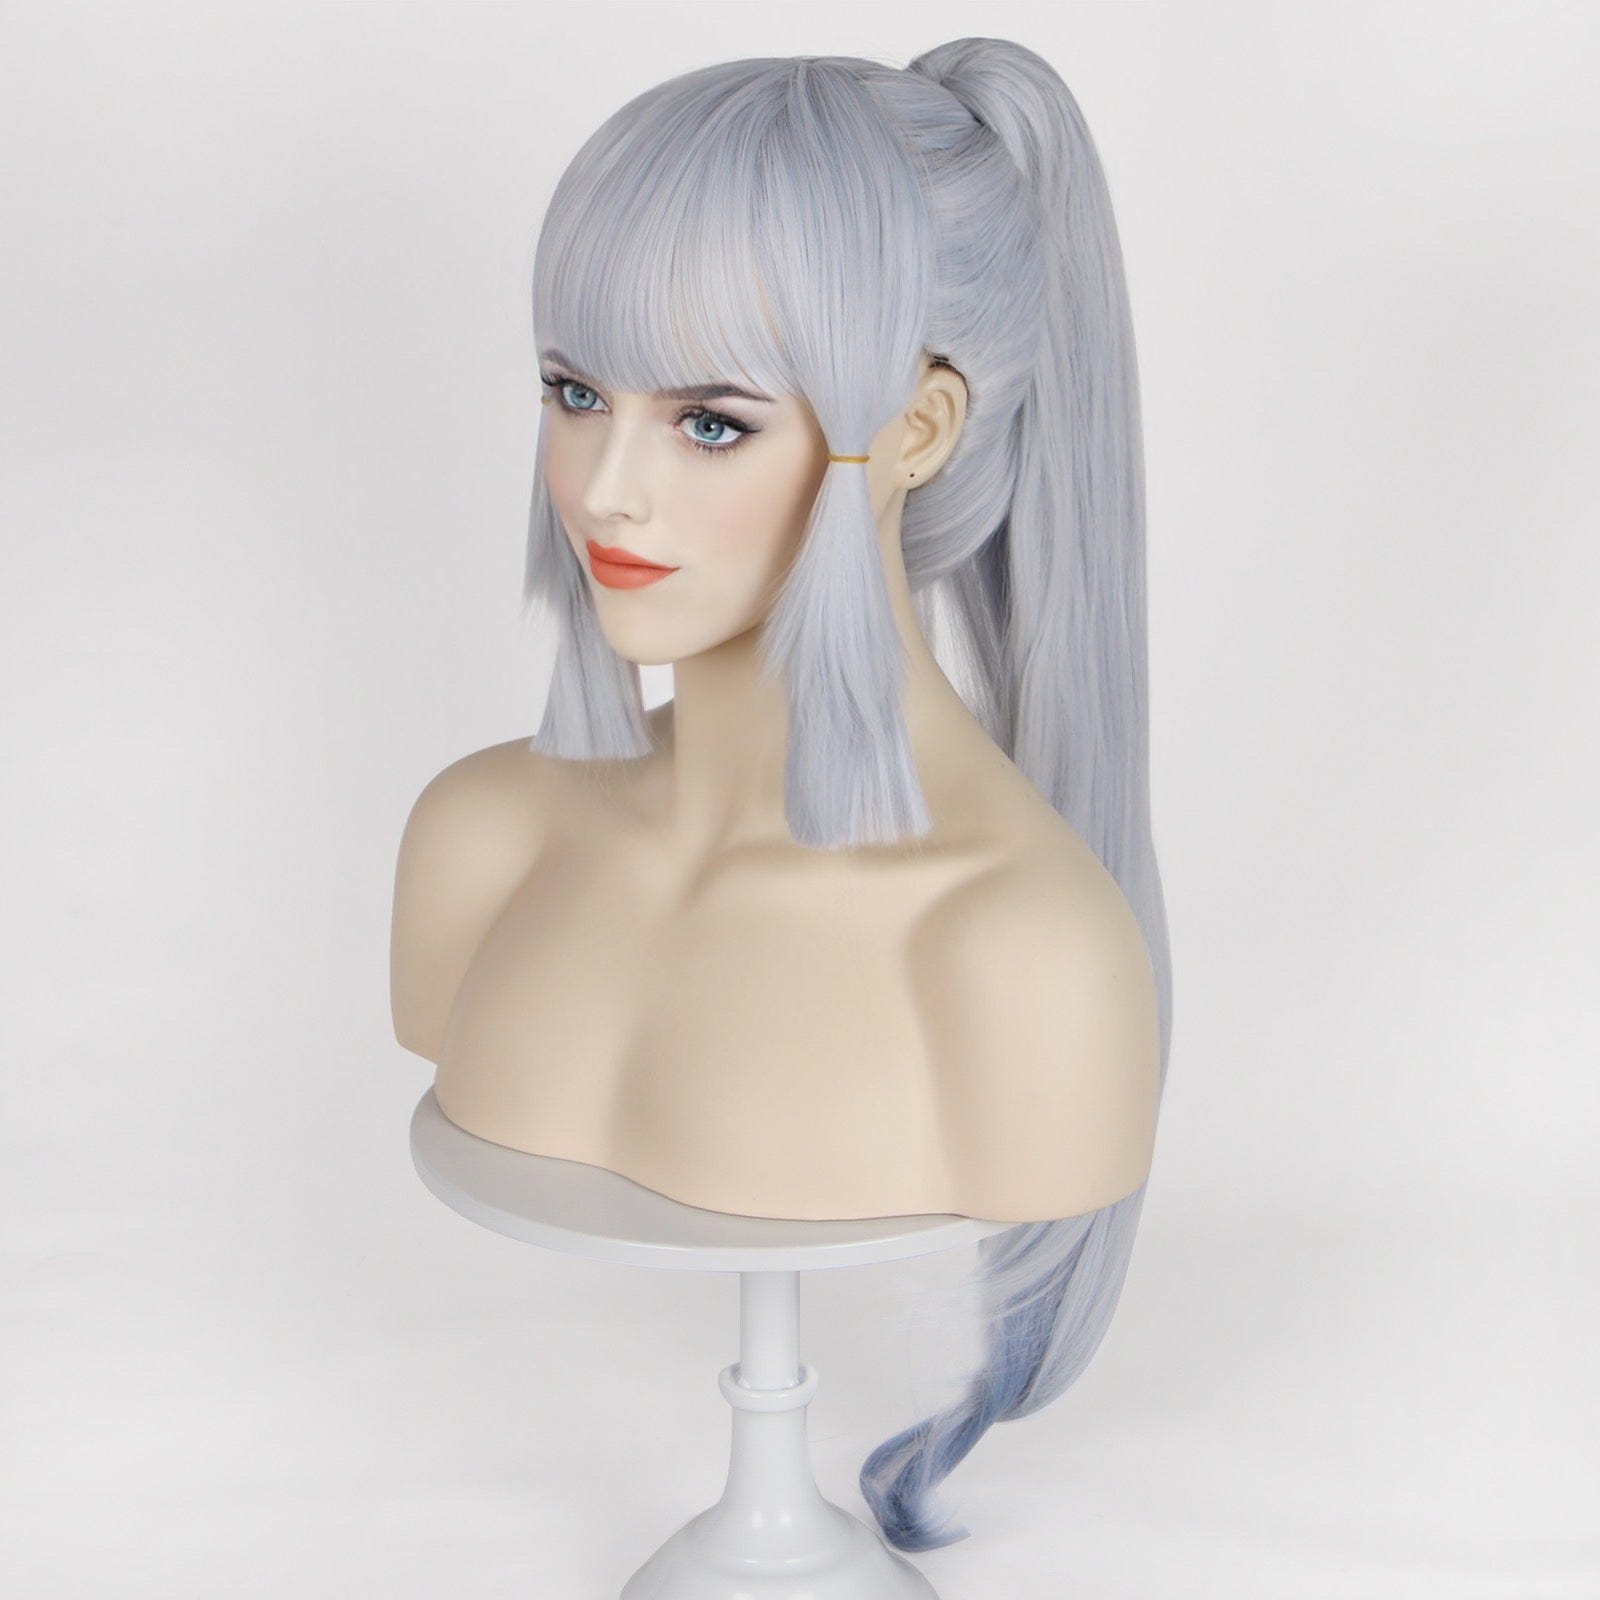 nevermindyrhead Women Ombre Greyish Blue Long Straight Layers Top Ponytail Japanese Princess Style Cosplay Wig